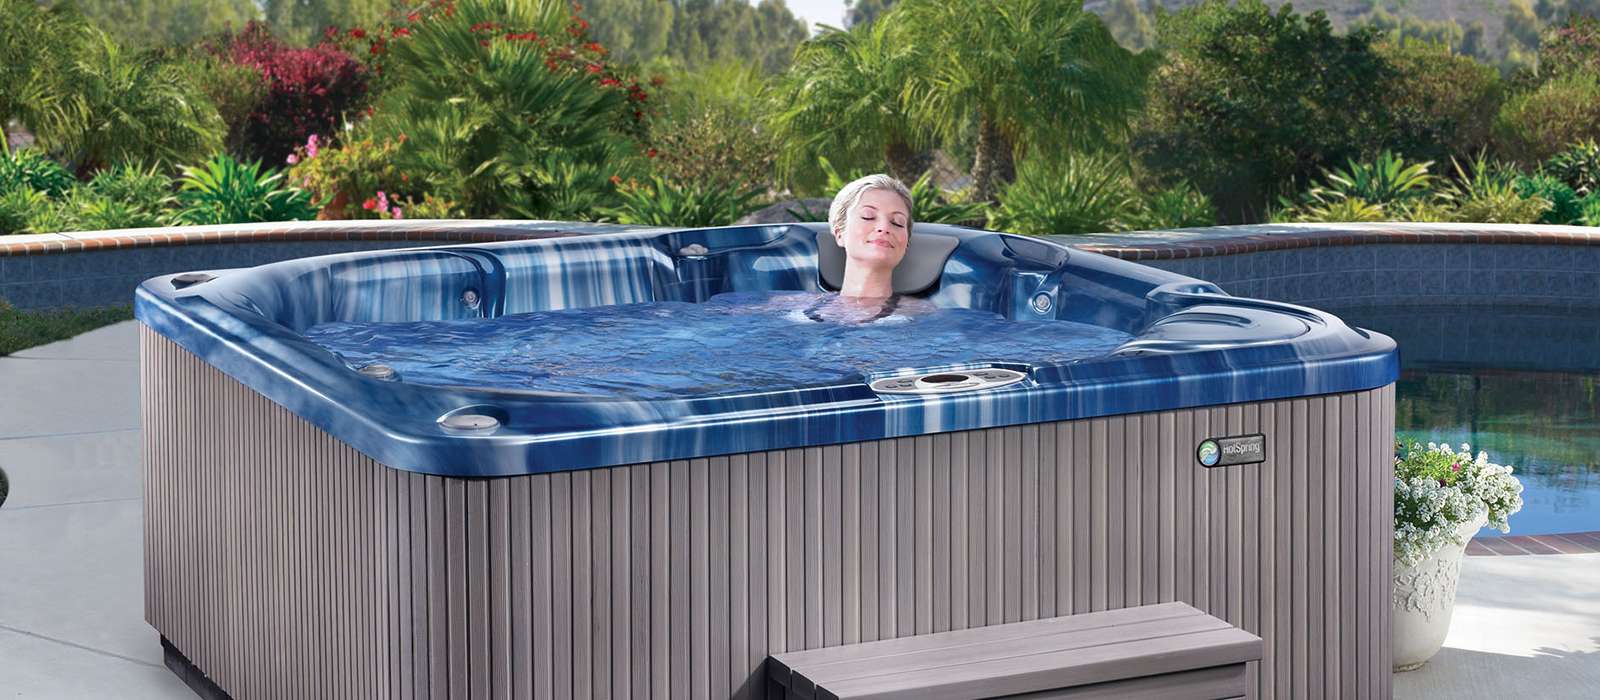 Style meets features in the Bolt hot tub, with a sleek cabinet profile, chrome-lined jets and a spa shell available in Tuscan Sun, Champagne Opal, Pearl, Sterling Marble and Ocean Wave. 